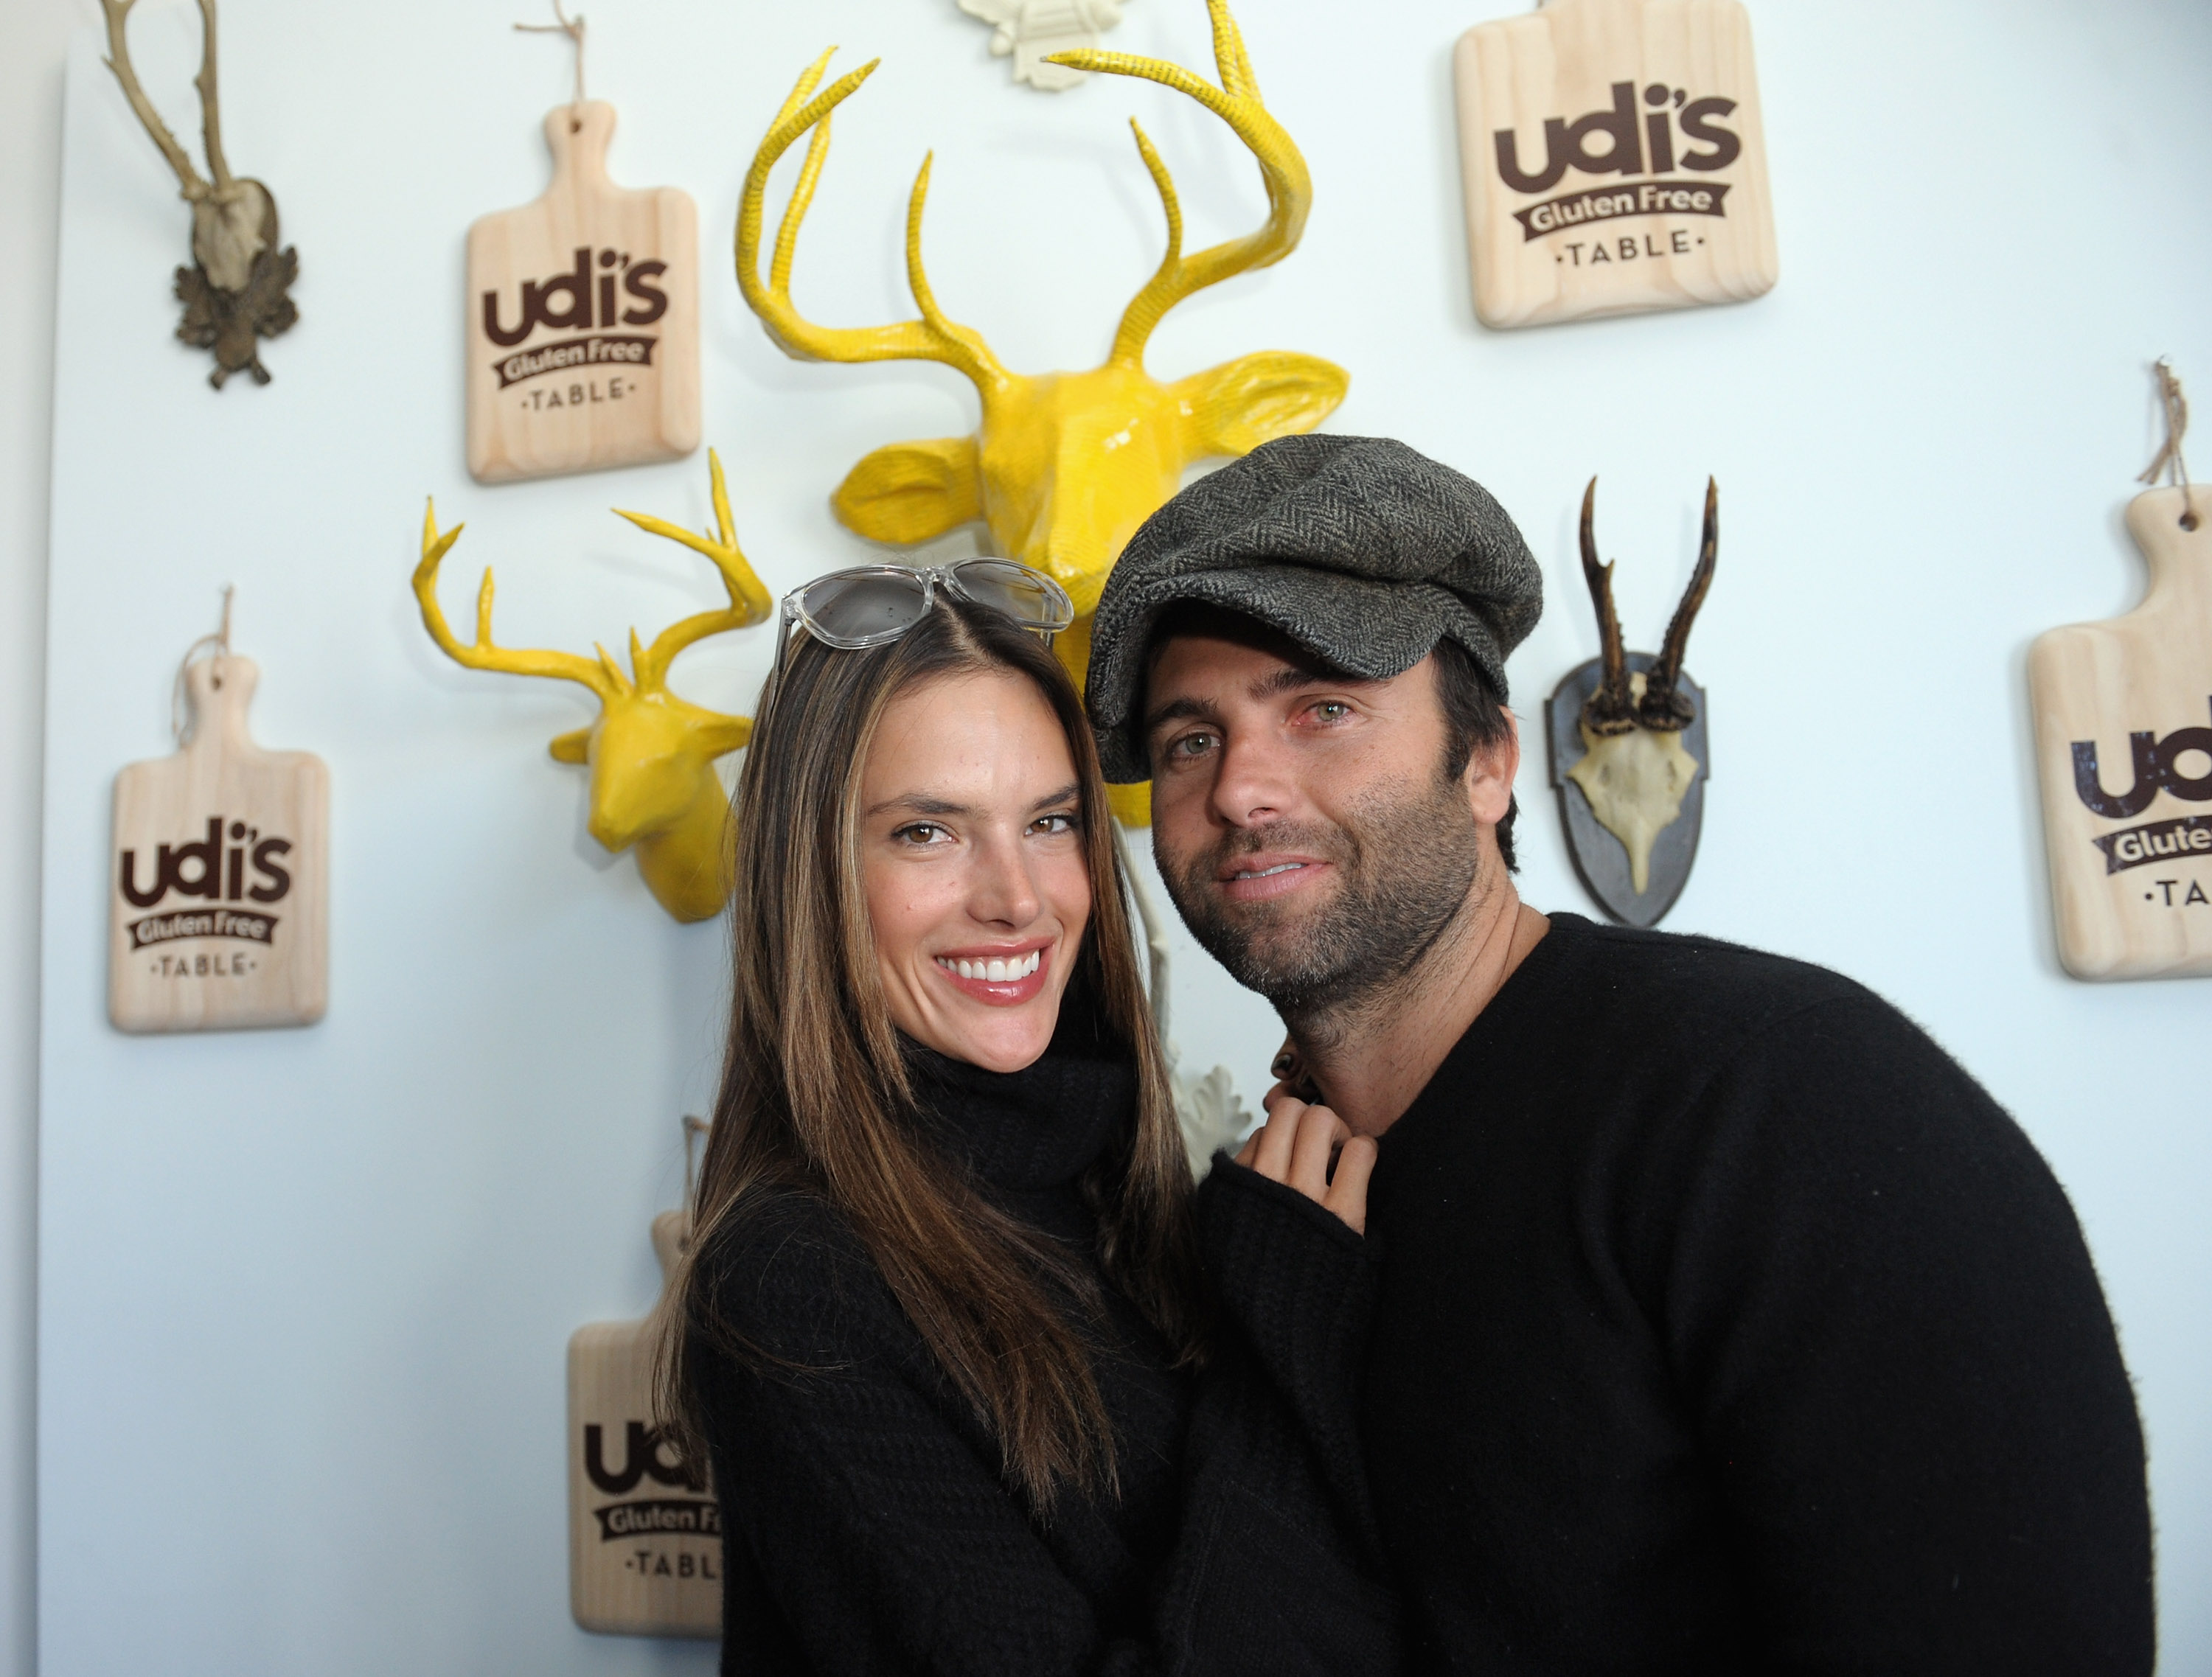 PARK CITY, UT - JANUARY 20:  Alessandra Ambrosio and Jamie Mazur attends the Udi's Gluten Free Table  on January 20, 2013 in Park City, Utah.  (Photo by Gustavo Caballero/Getty Images for Udi's Gluten Free Table)